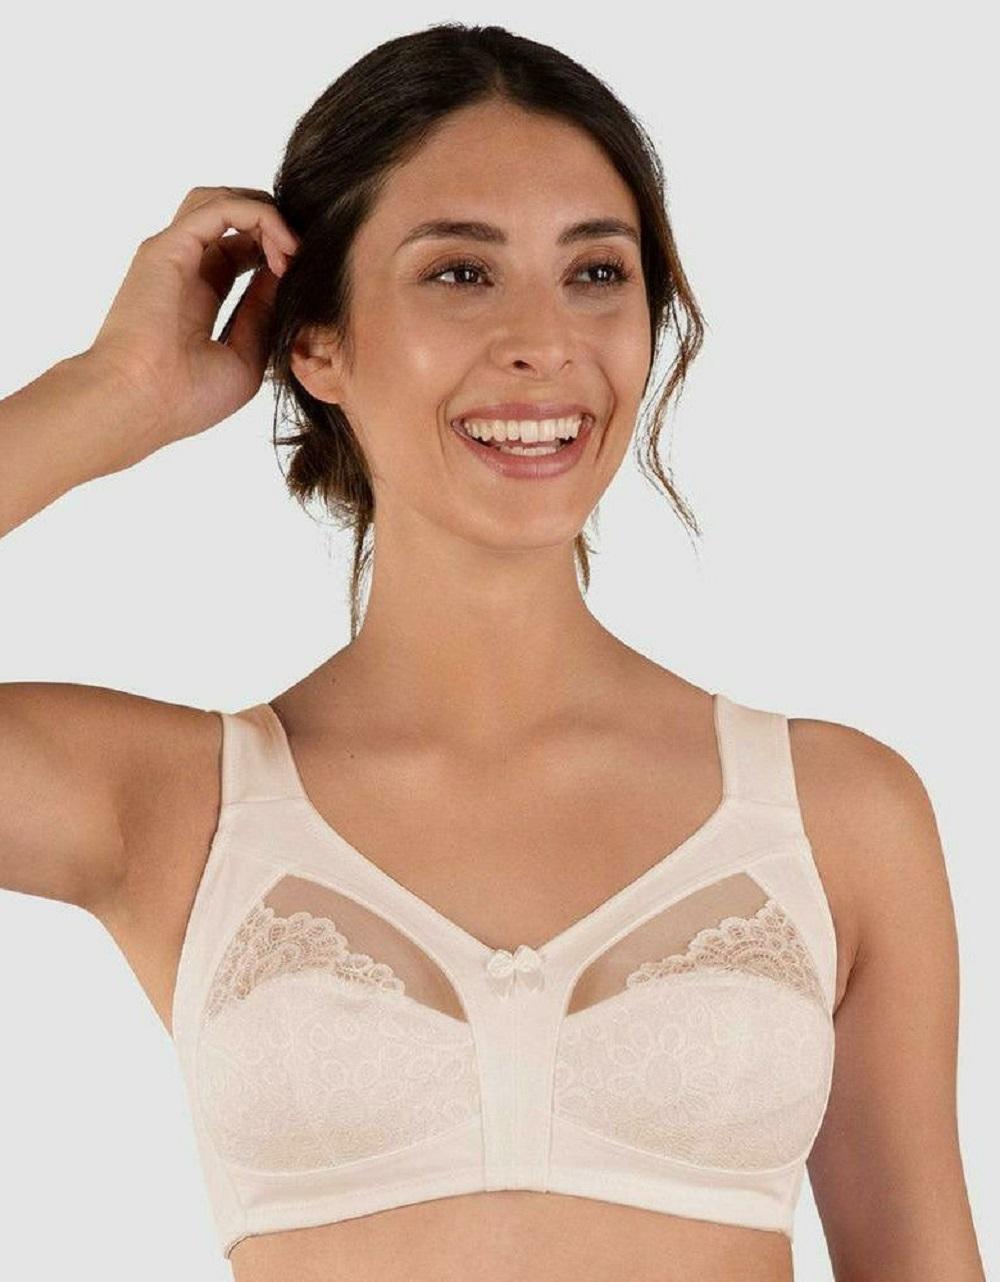 Naturana Wireless Cotton and Lace Full Cup Bra with Comfort Straps